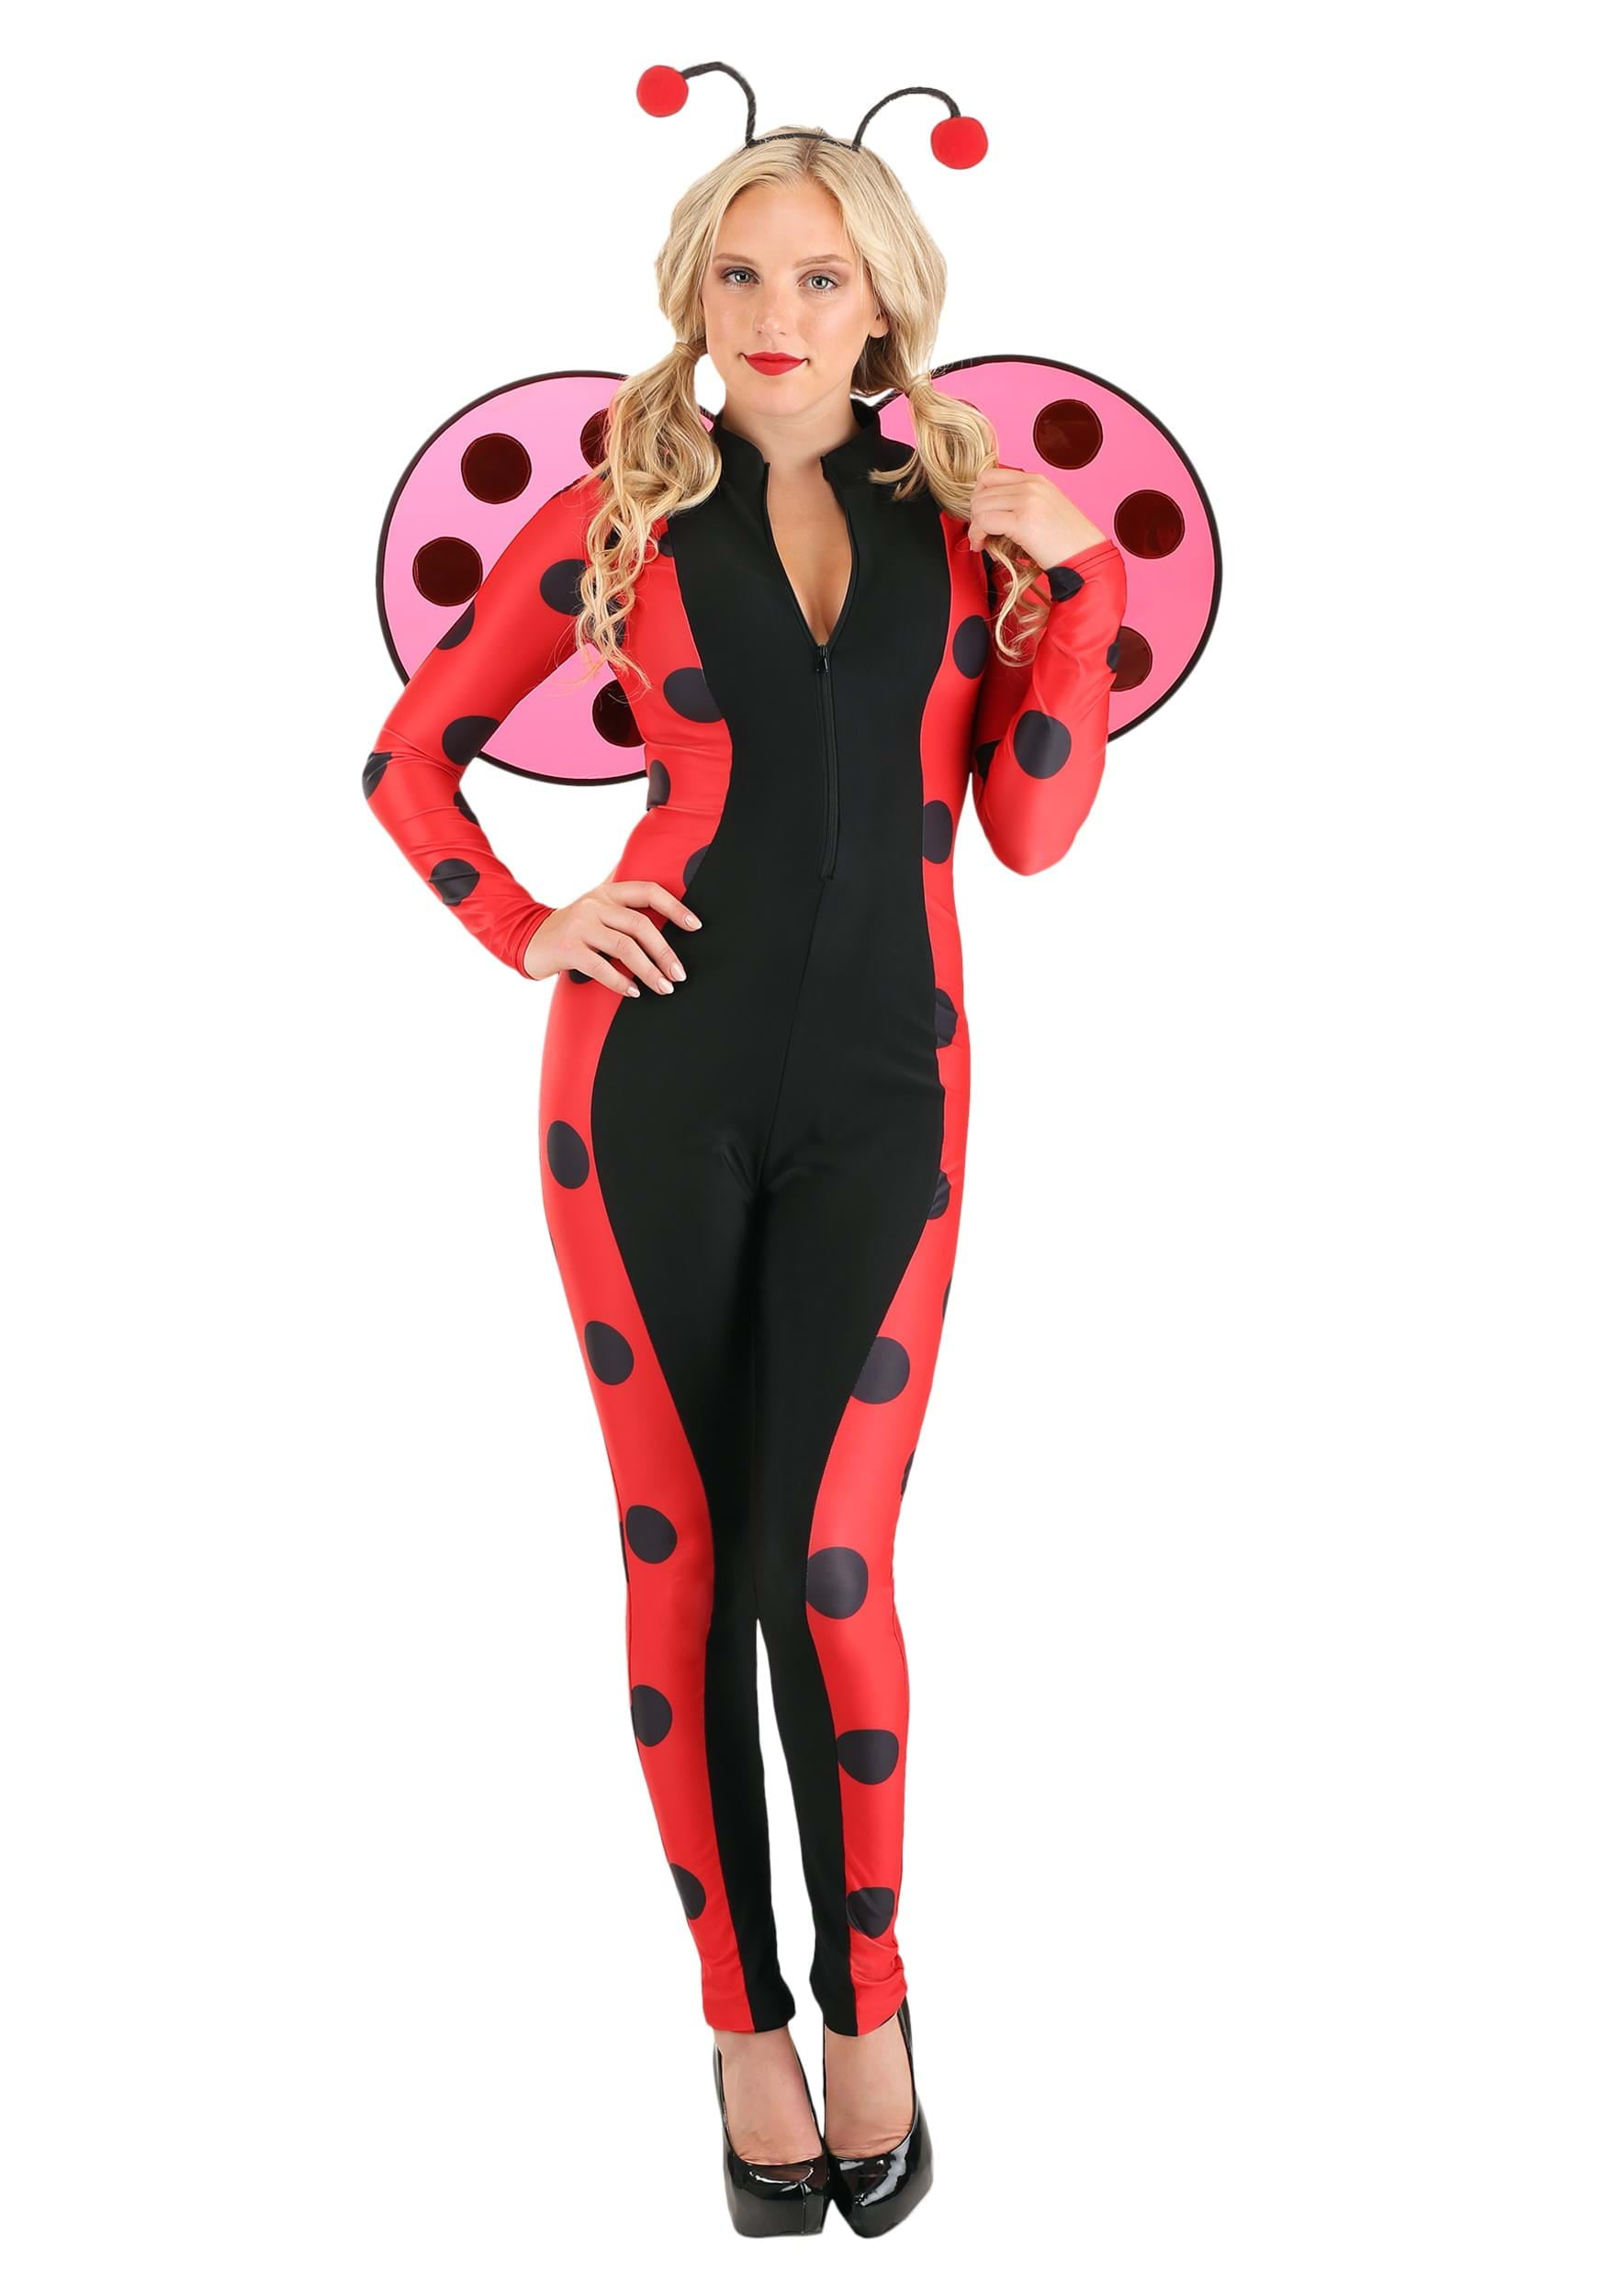 Buy Luscious Ladybug Costume For Women Online At Lowest Price In India